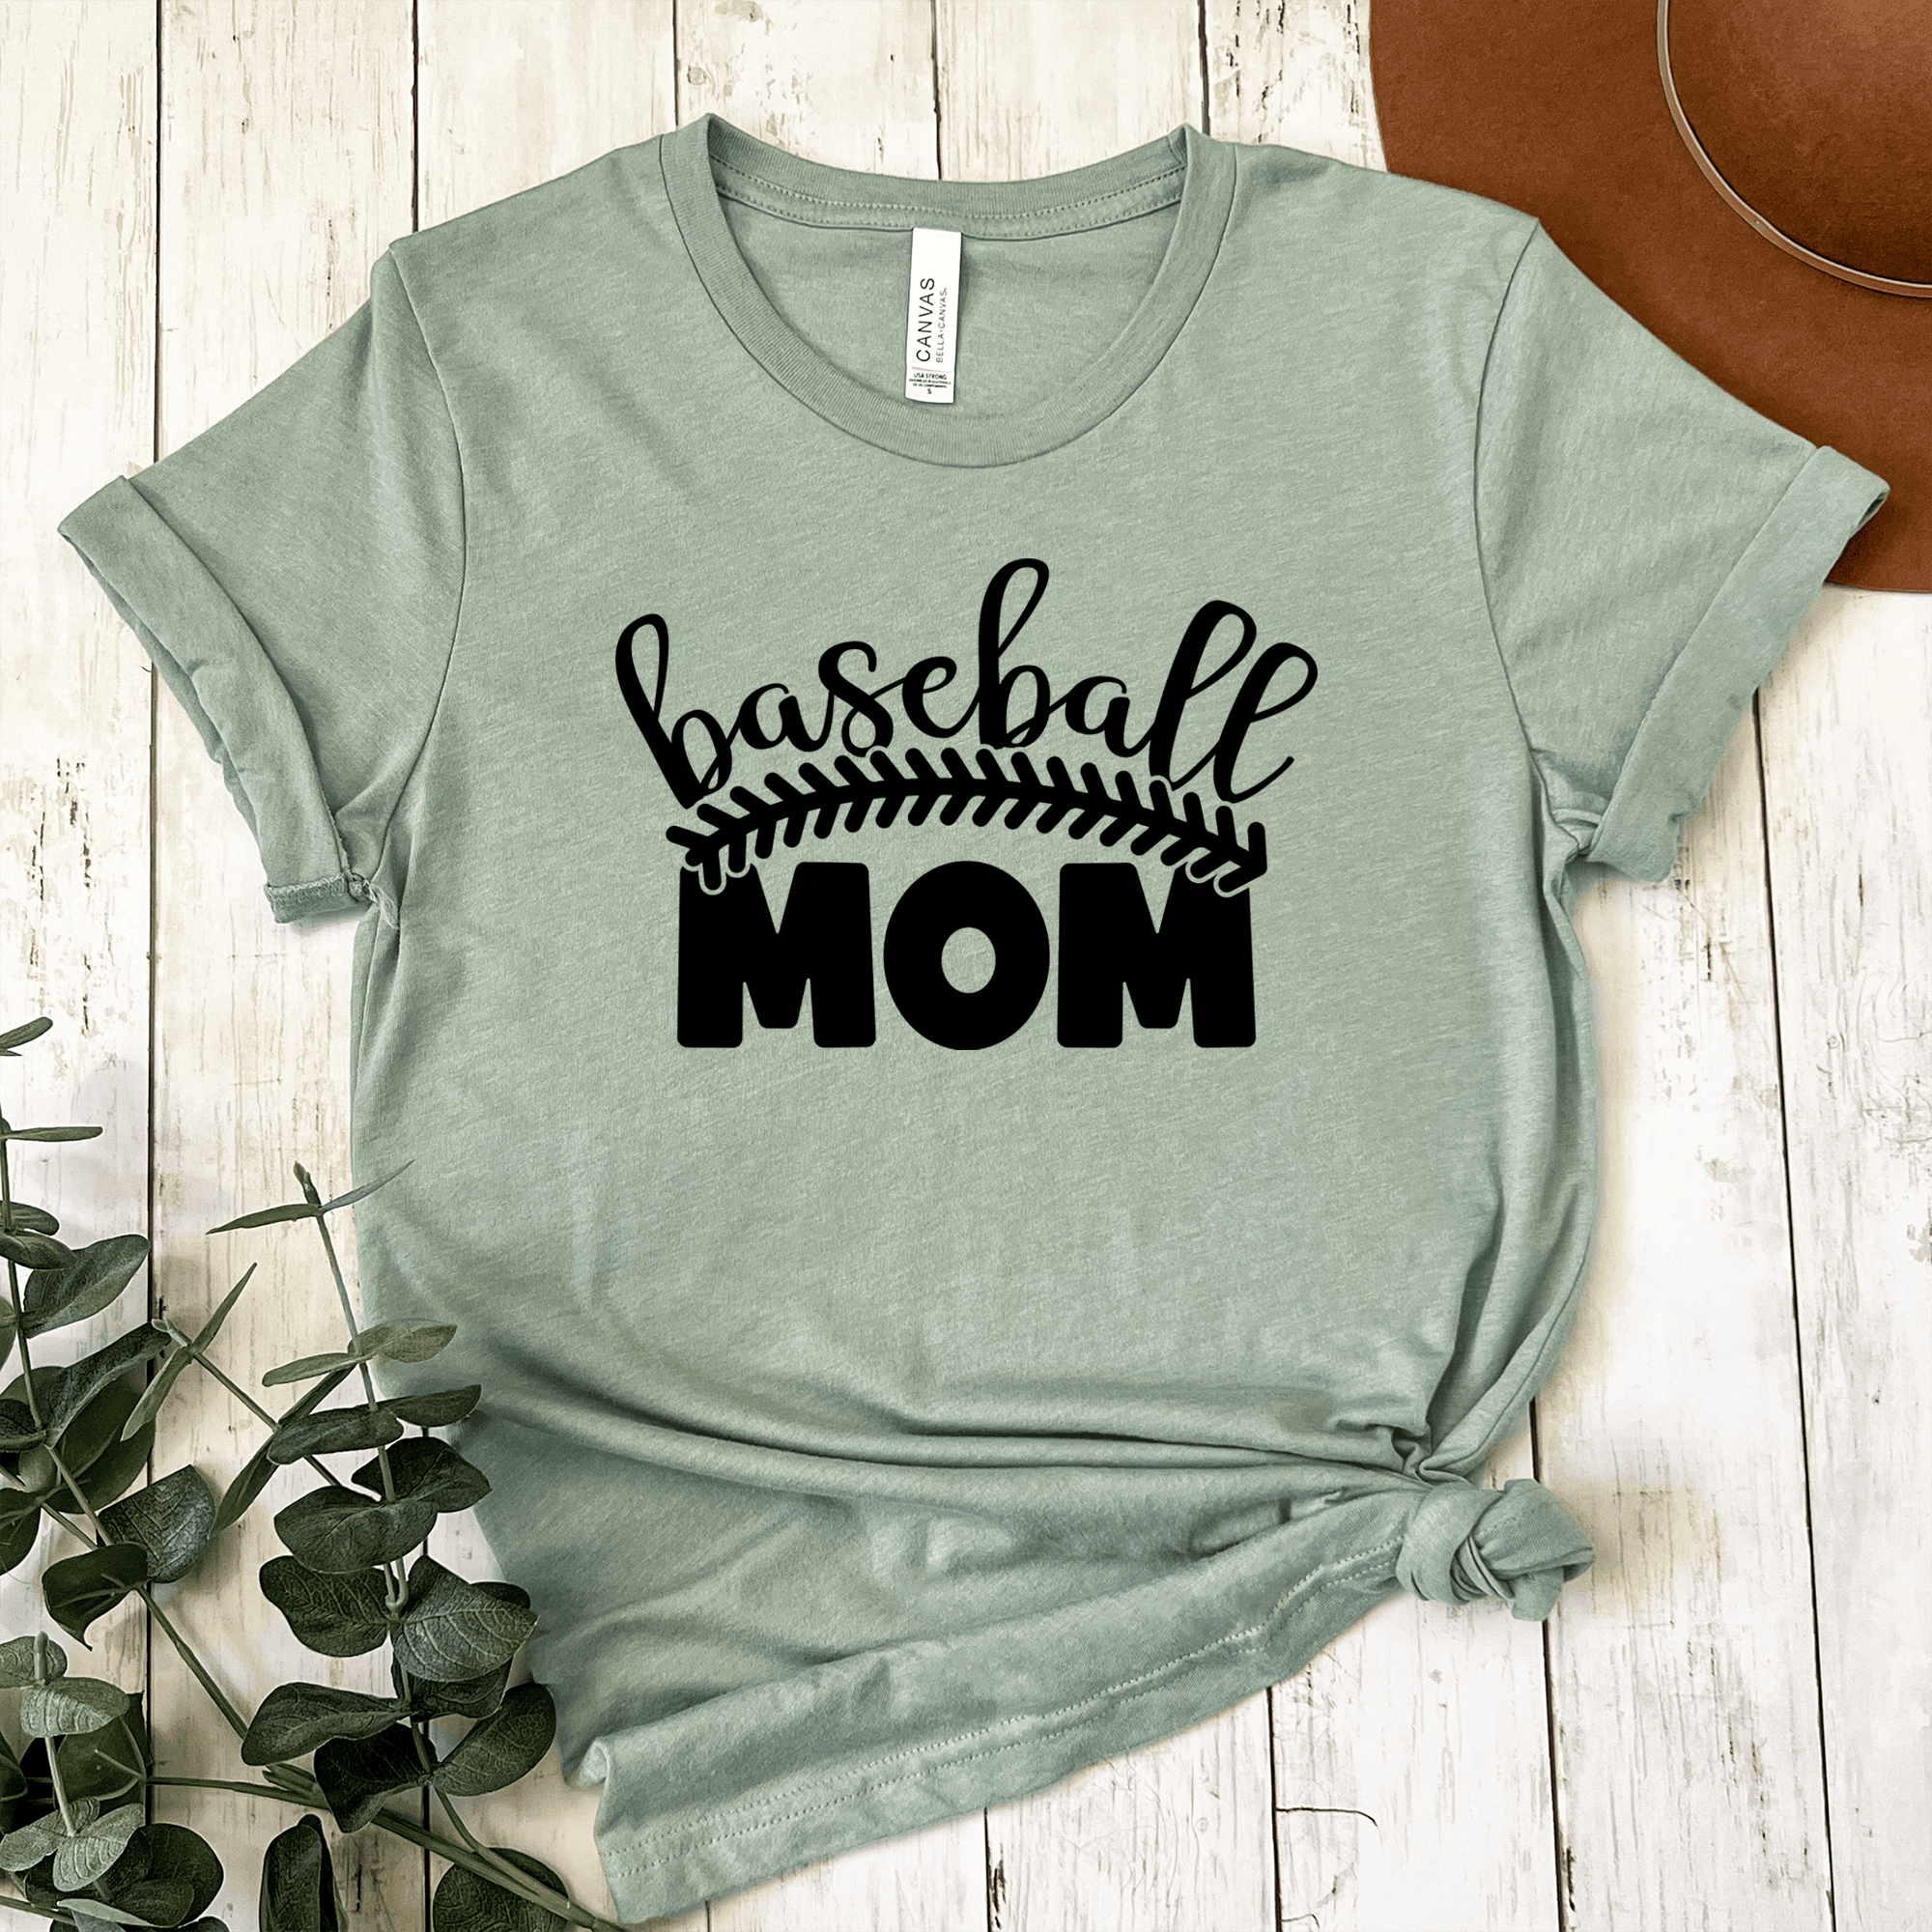 Womens Light Green T Shirt with Stitched-Baseball-Mom design